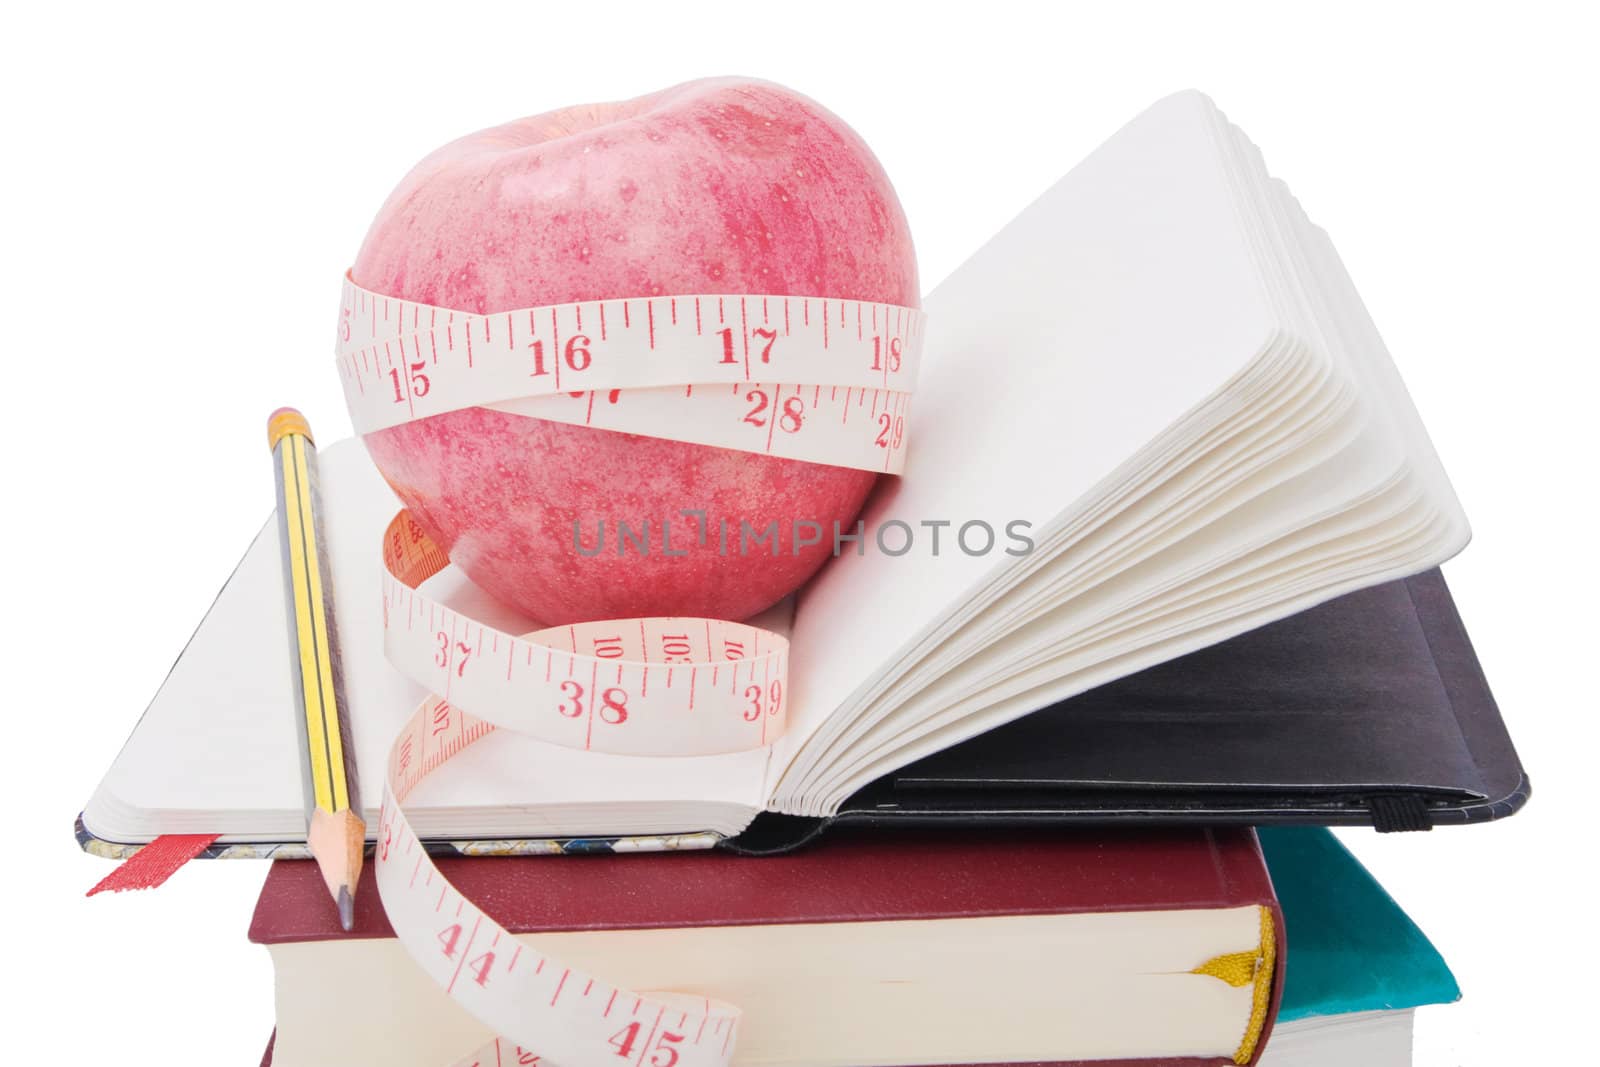 Big ripe red apple with white measure tape around it on pile of books as metaphor of healthy eating and diet